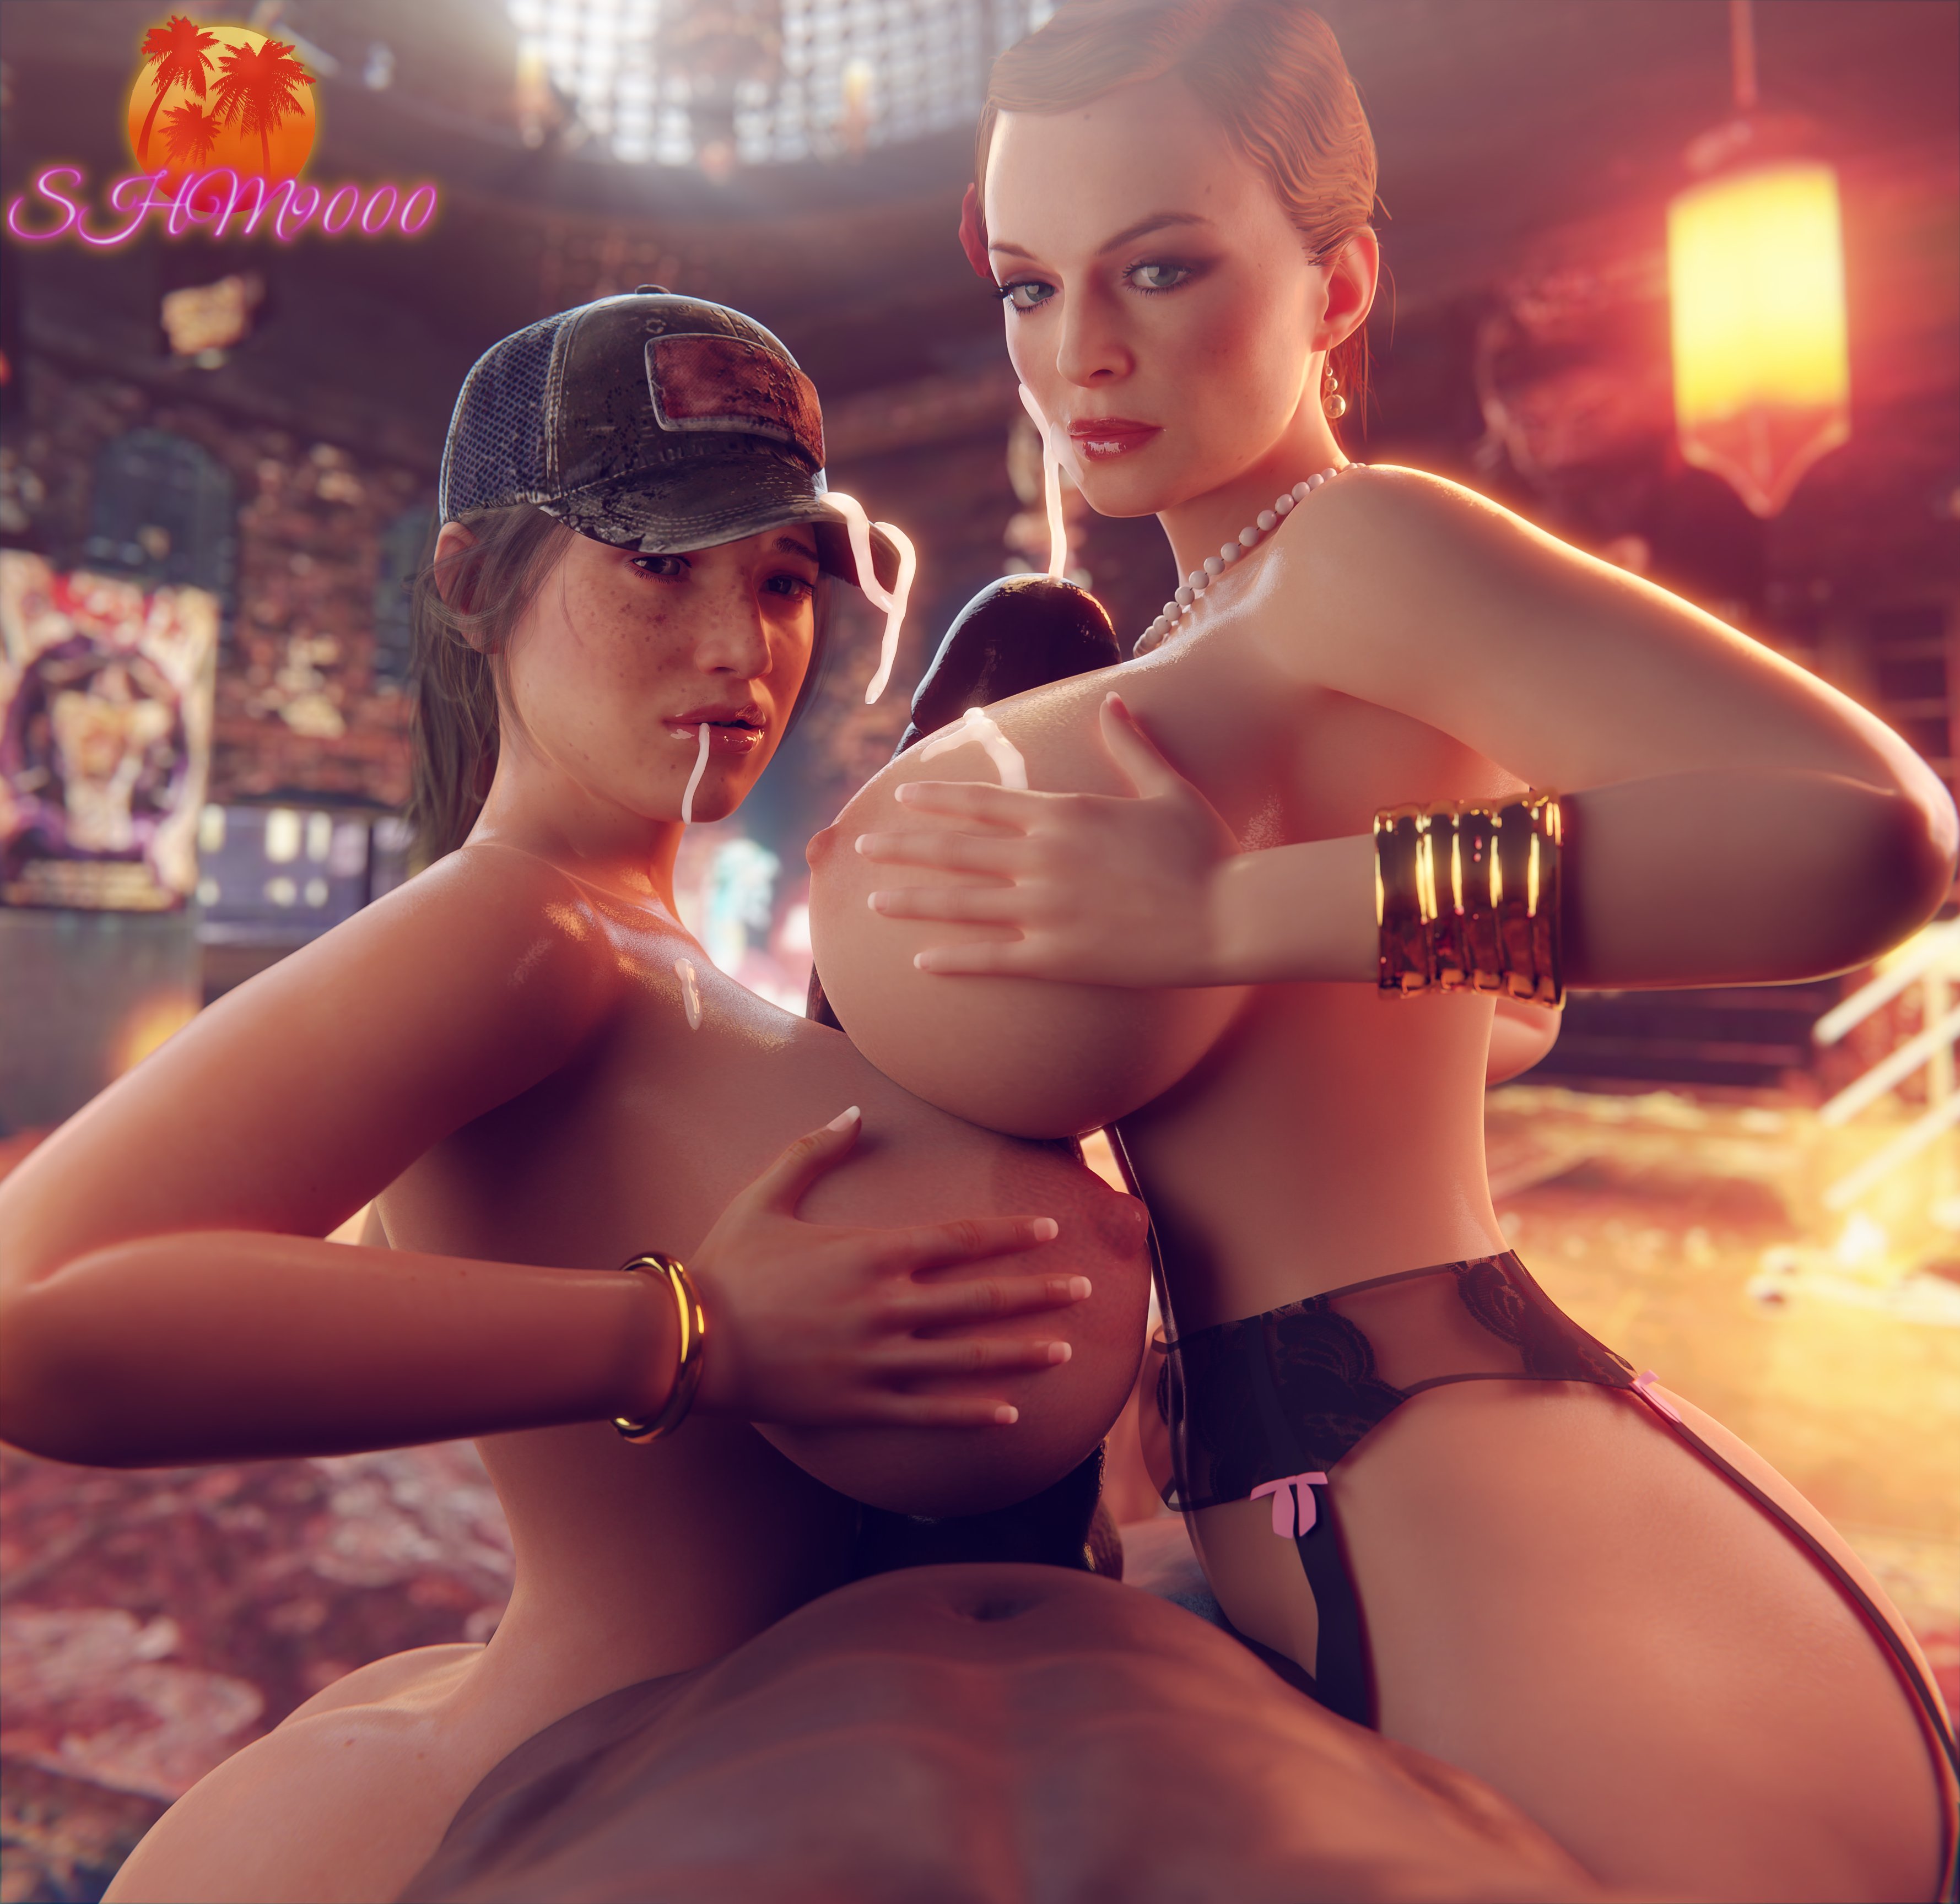 Call Of Duty Black Ops 3 Porn.